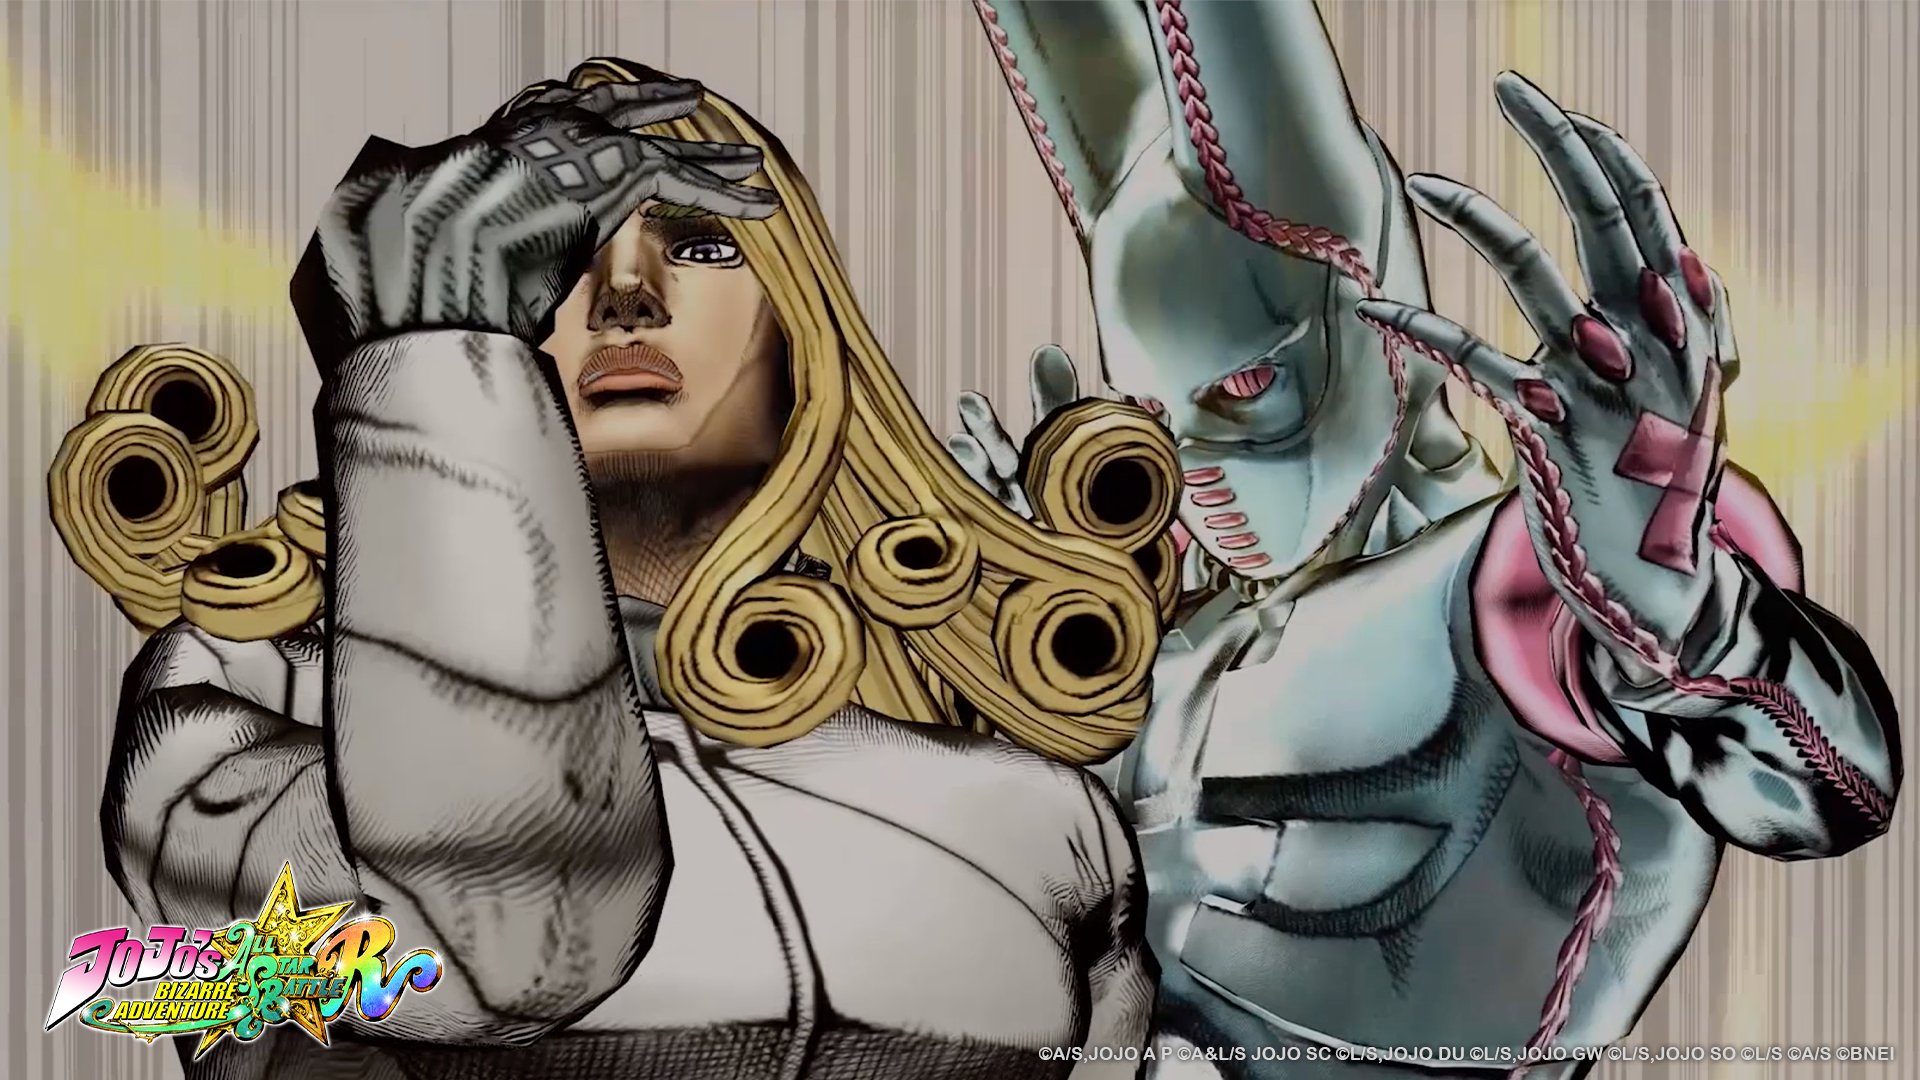 JoJo's Bizarre Adventure: All Star Battle R Matter What Dimension You Visit In #JJASBR, You'll Be Celebrating Funny Valentine Today, The 23rd President Of The United States. #PresidentsDay